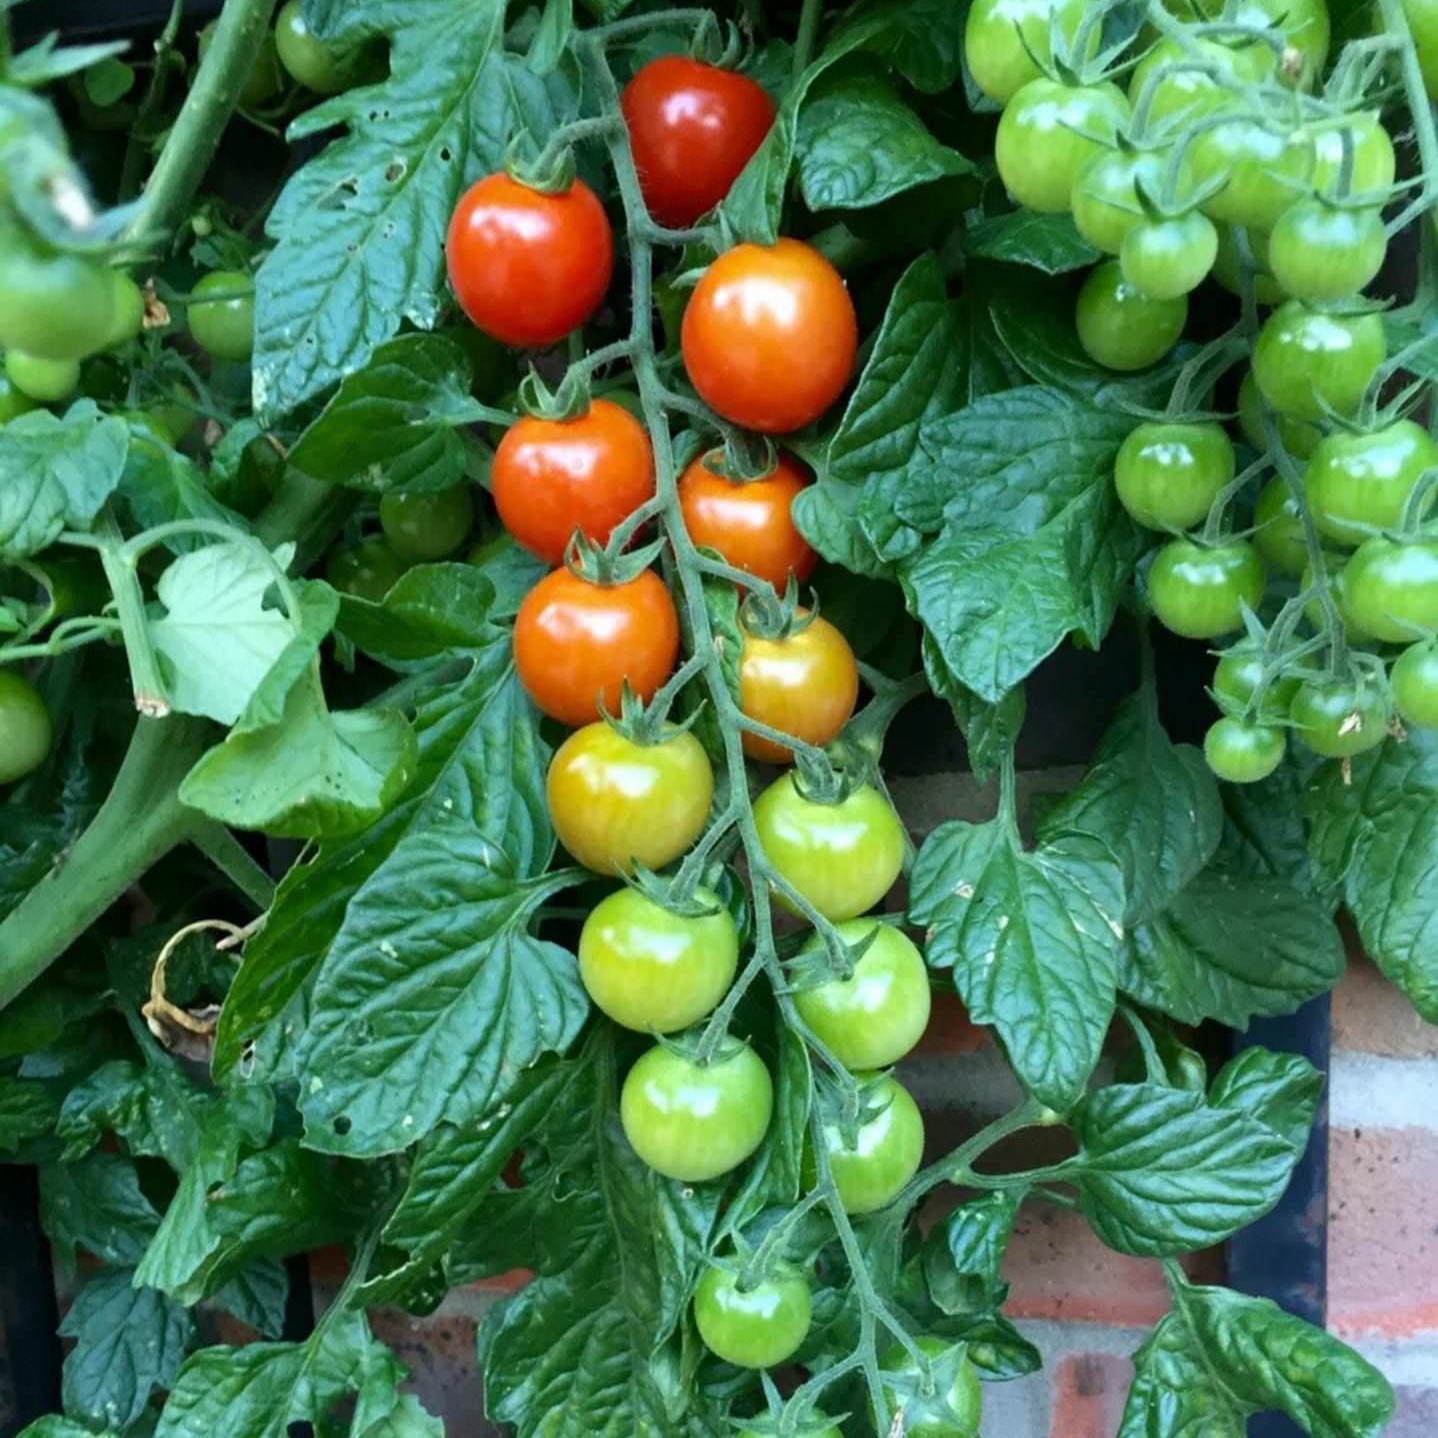 Visually pleasing photo: Tomatoes on the vine